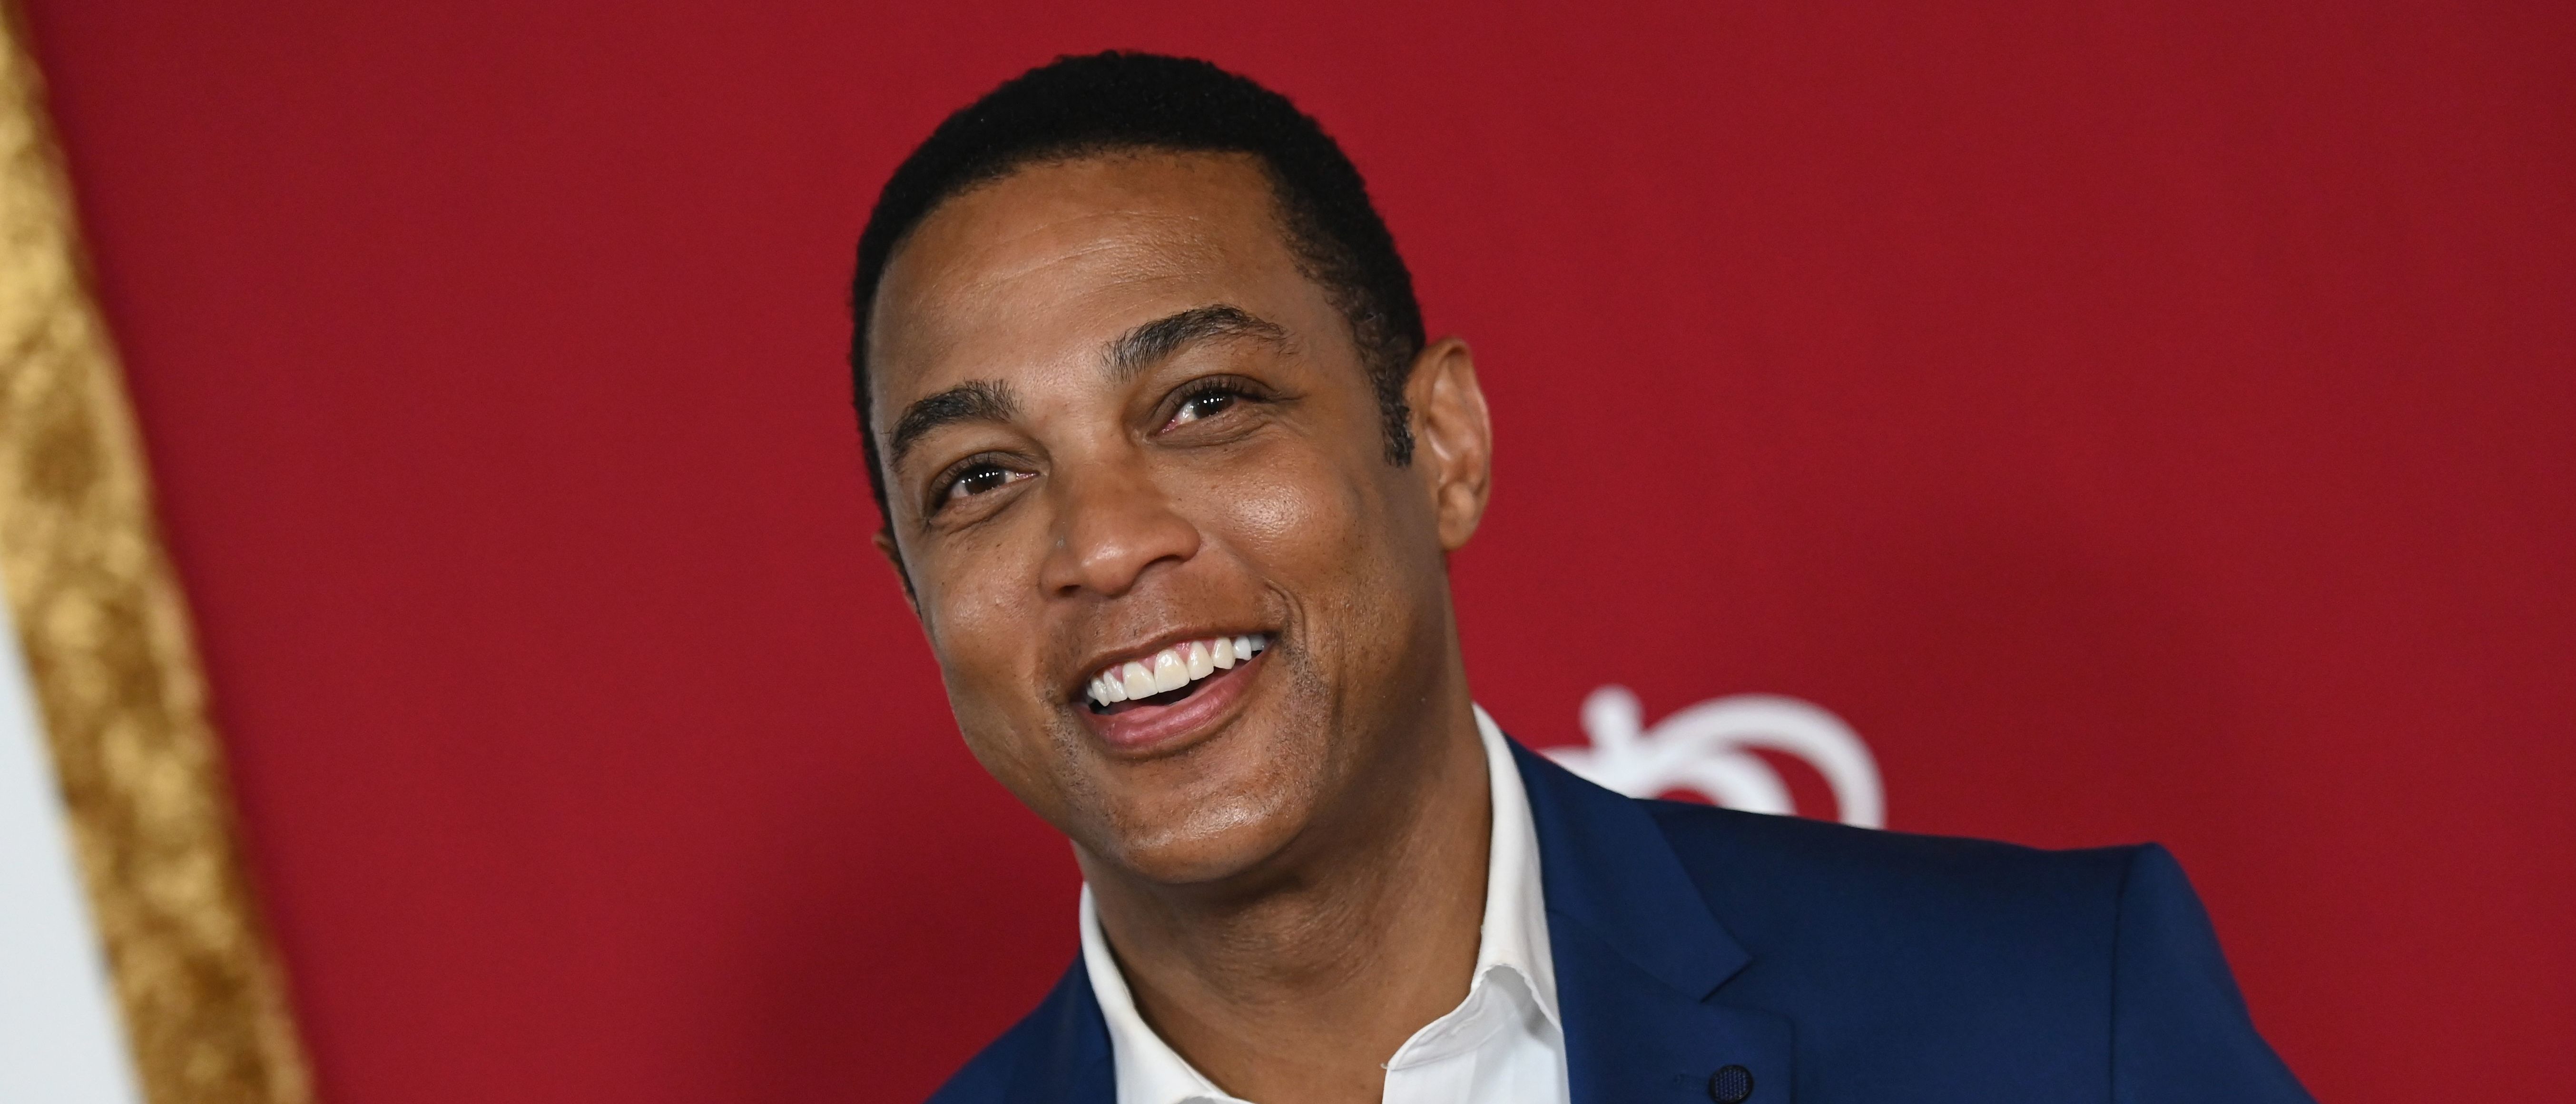 US journalist Don Lemon attends the premiere of "Shaft" at AMC Lincoln Square on June 10, 2019 in New York City. (ANGELA WEISS/AFP/Getty Images)